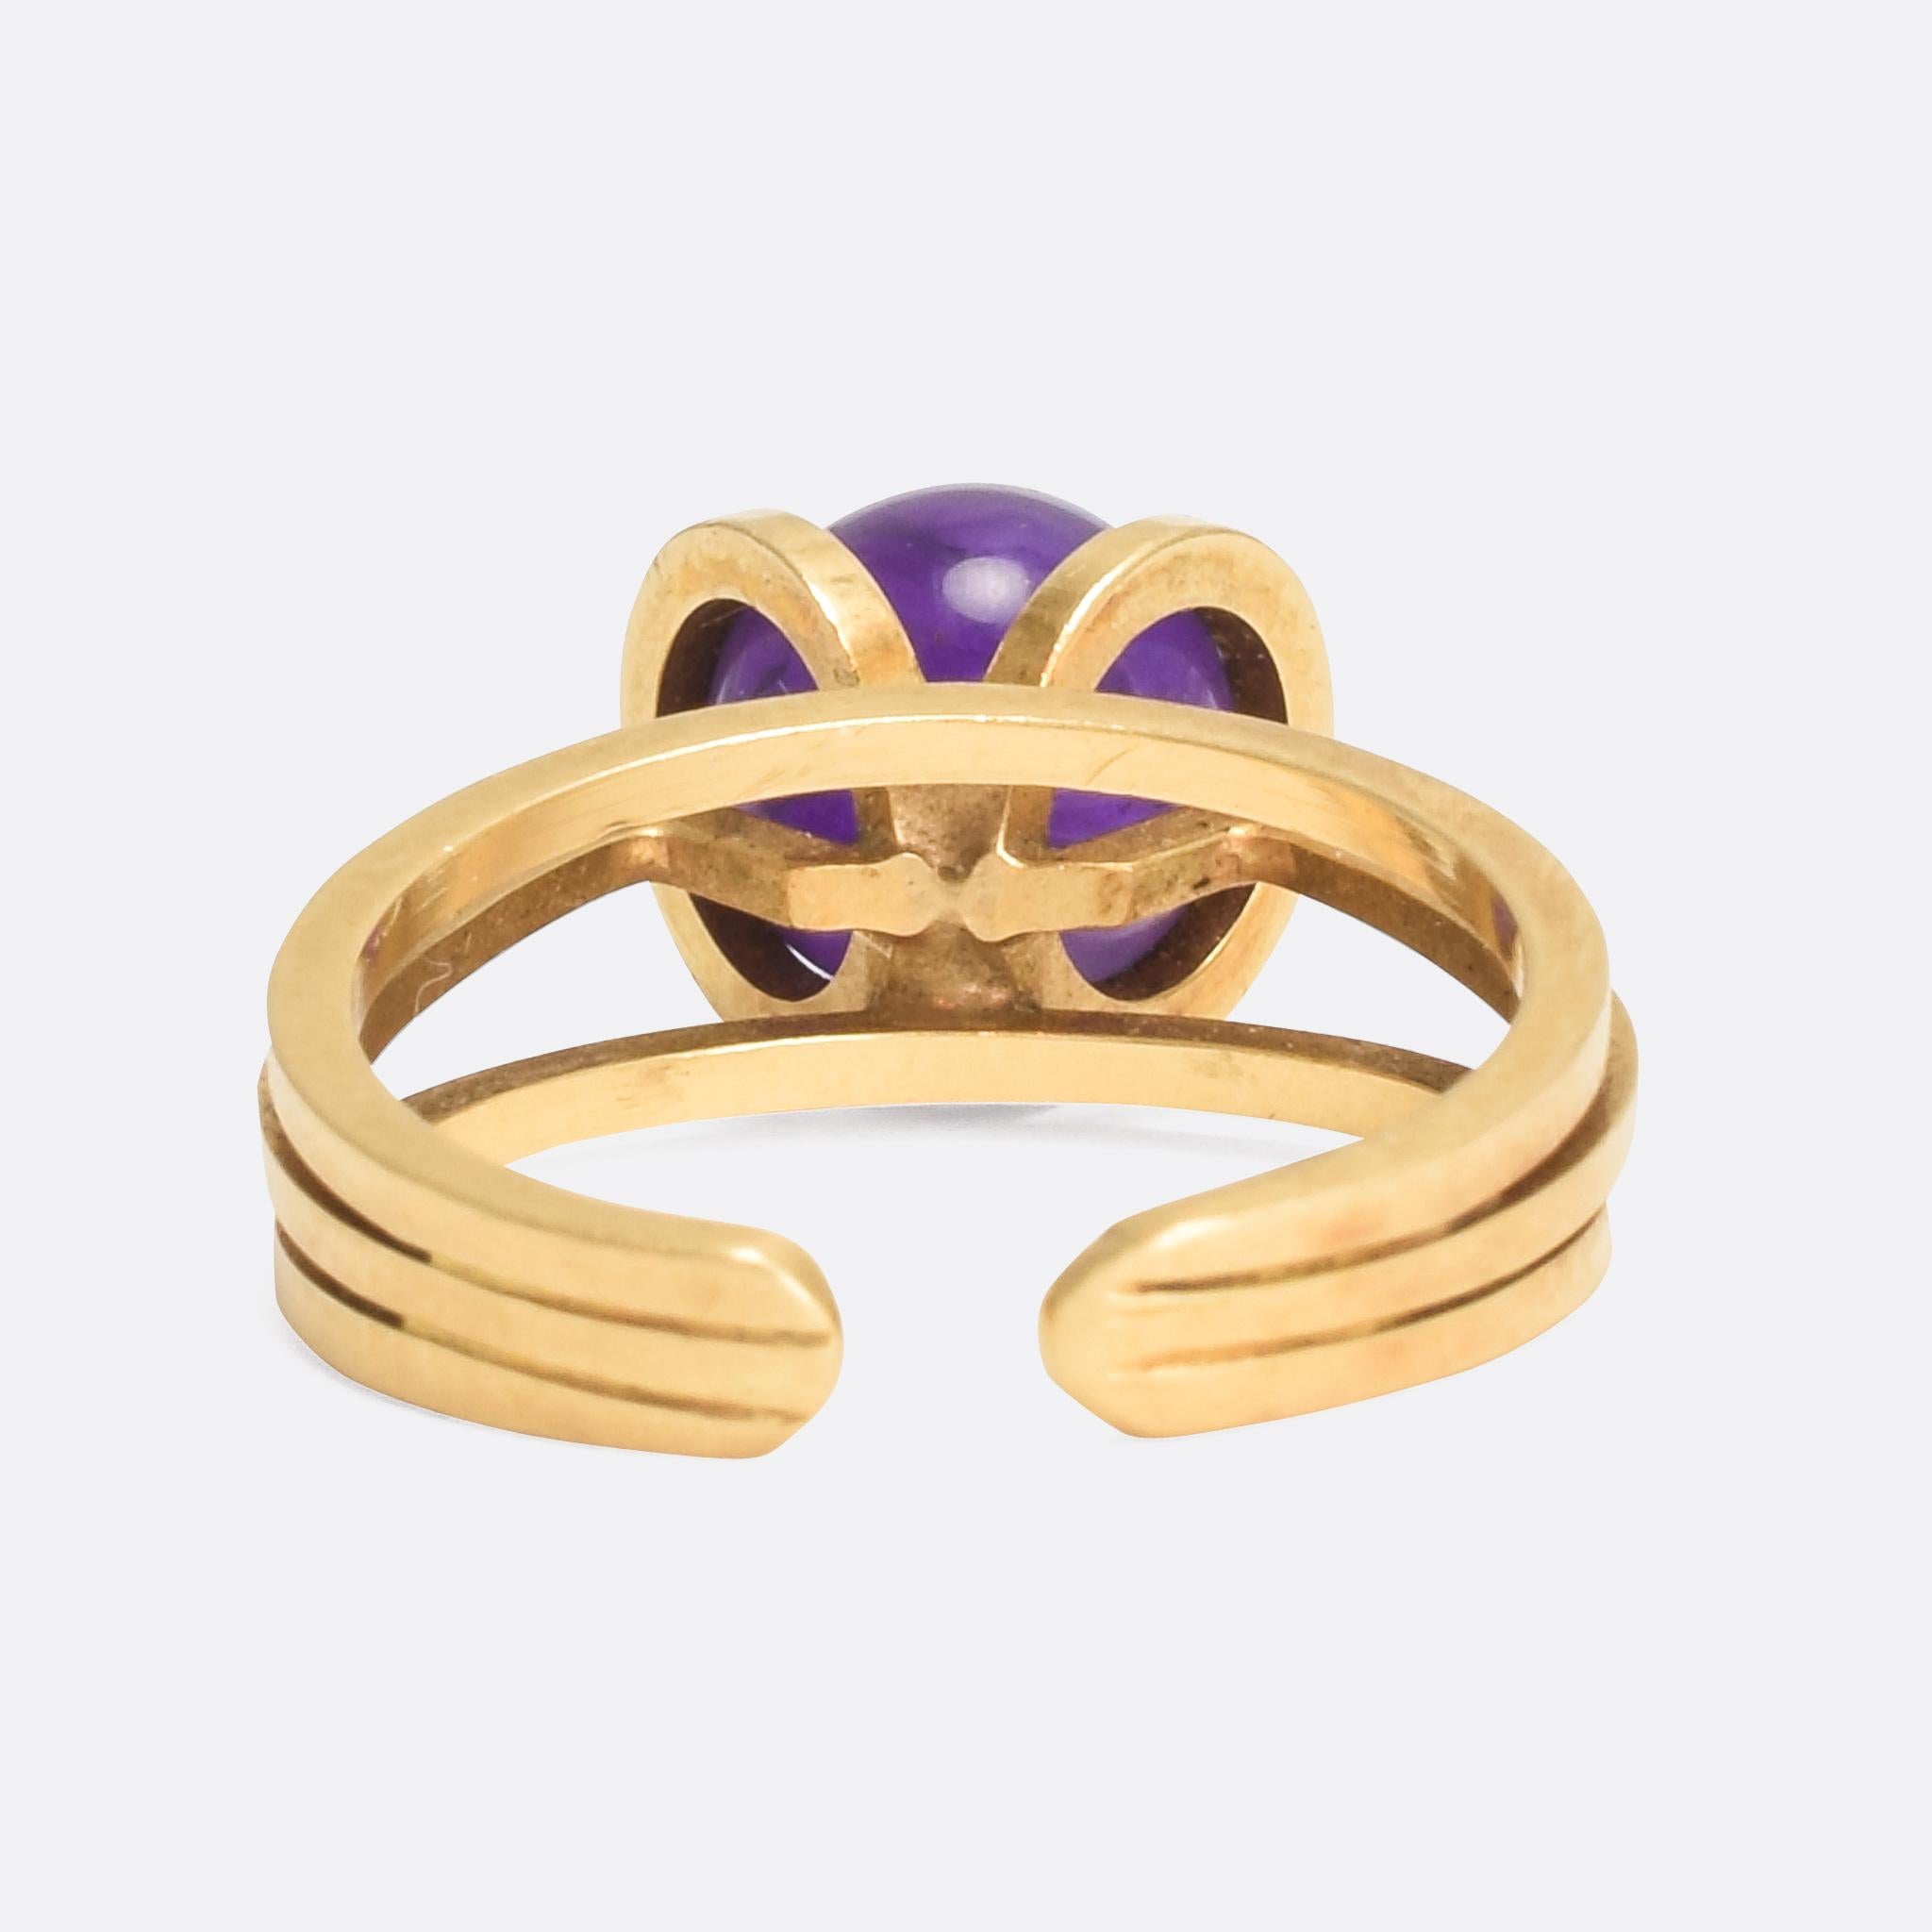 rings with interchangeable stones